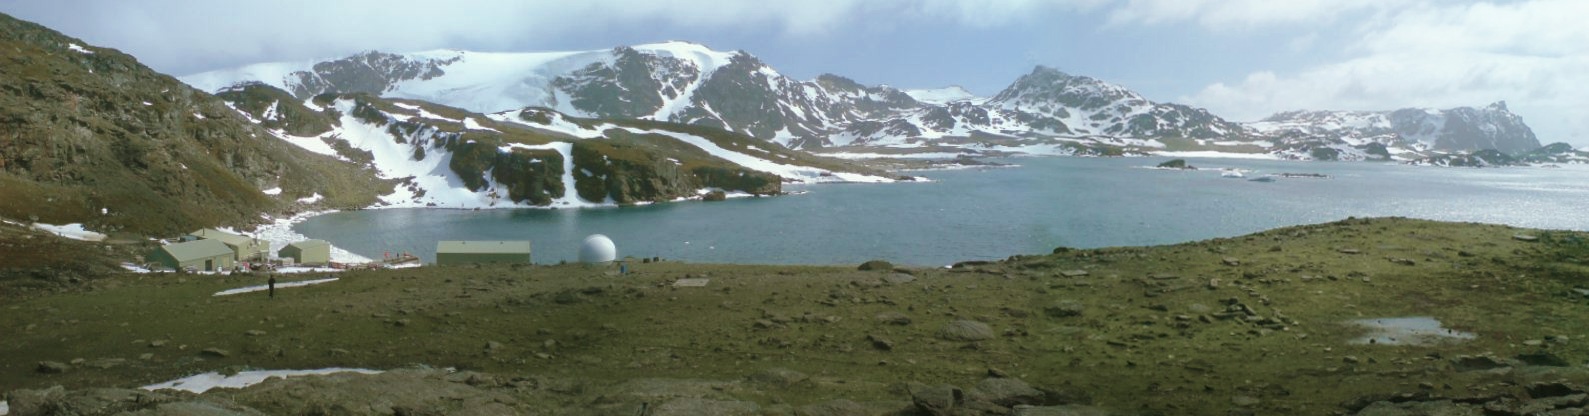 As Temperatures Rise, Antarctica is Turning Green